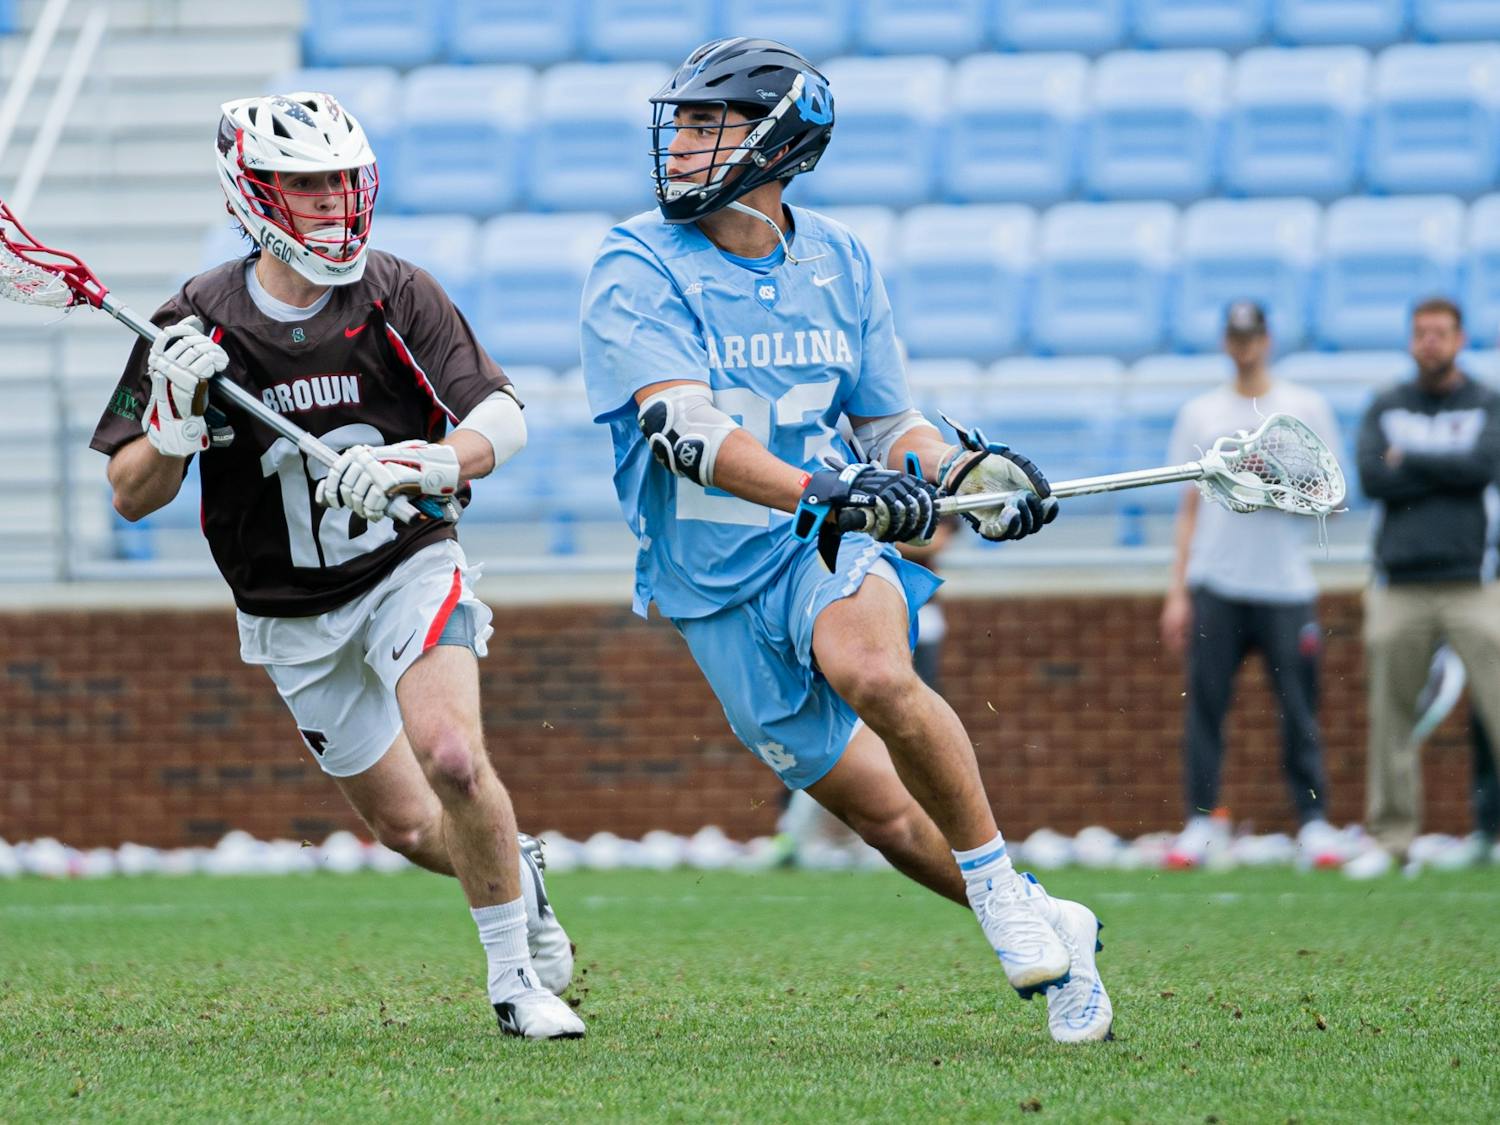 First-year midfielder Ty English (23) prepares to take a shot during a men's lacrosse game in Dorrance Stadium against Brown University on Wednesday, Feb. 23, 2022. UNC won 14-11.